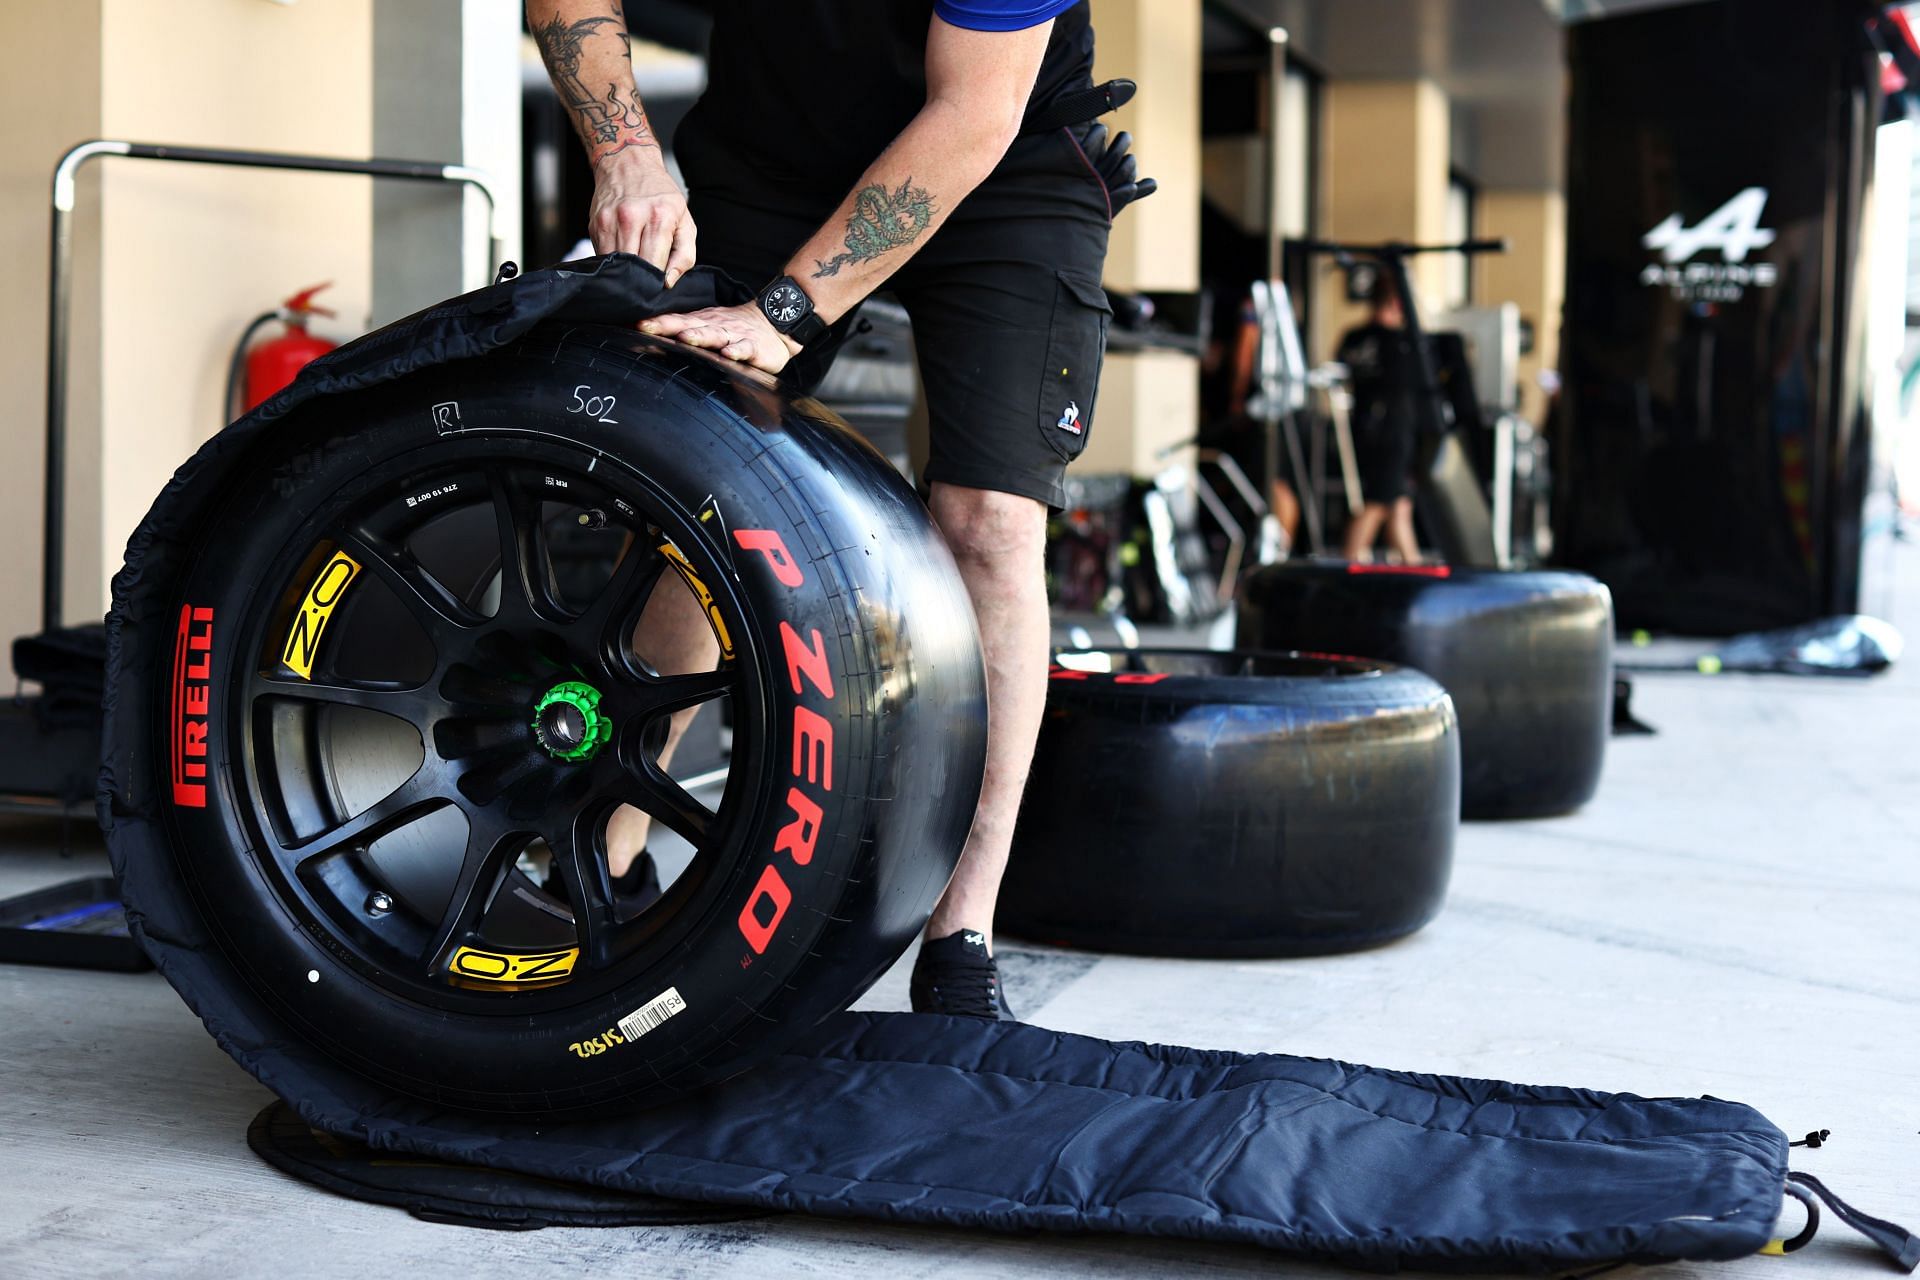 The new Pirelli 18-inch tires to be used for the F1 2022 season (Photo by Clive Rose/Getty Images)